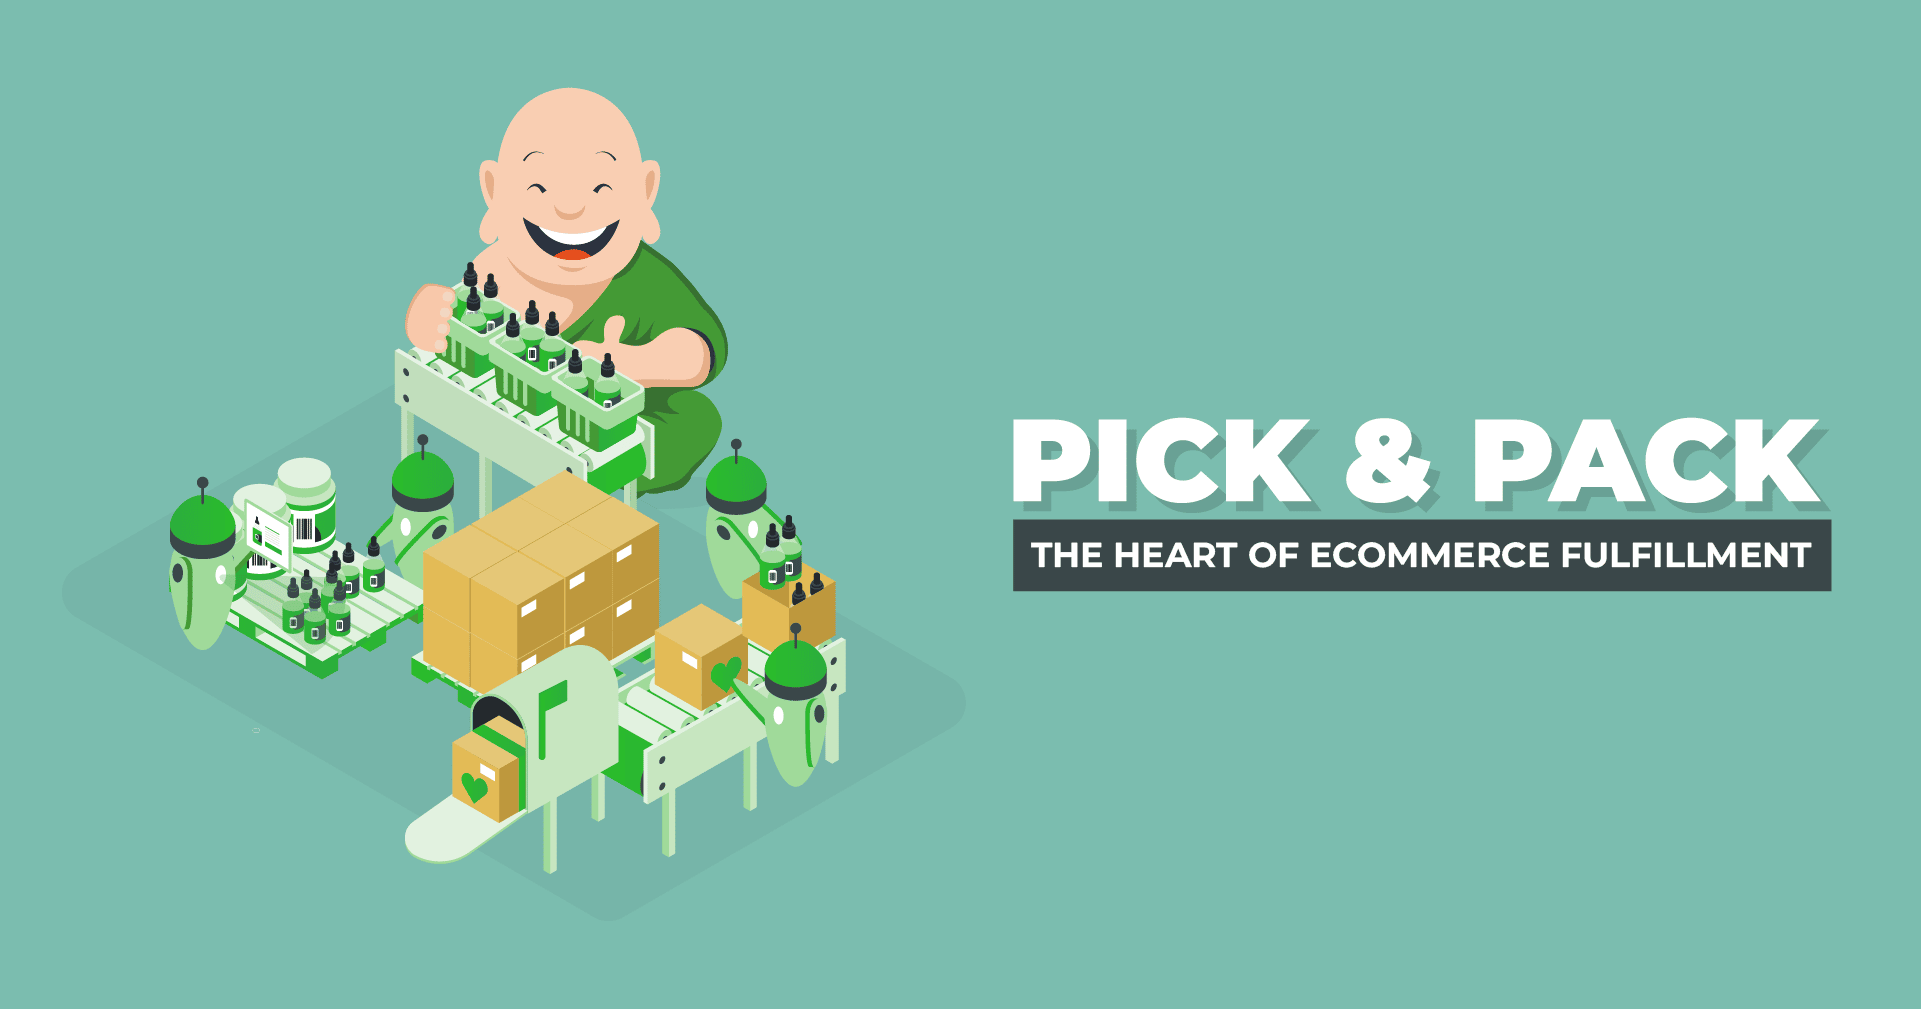 Pick & Pack - The Heart of Ecommerce